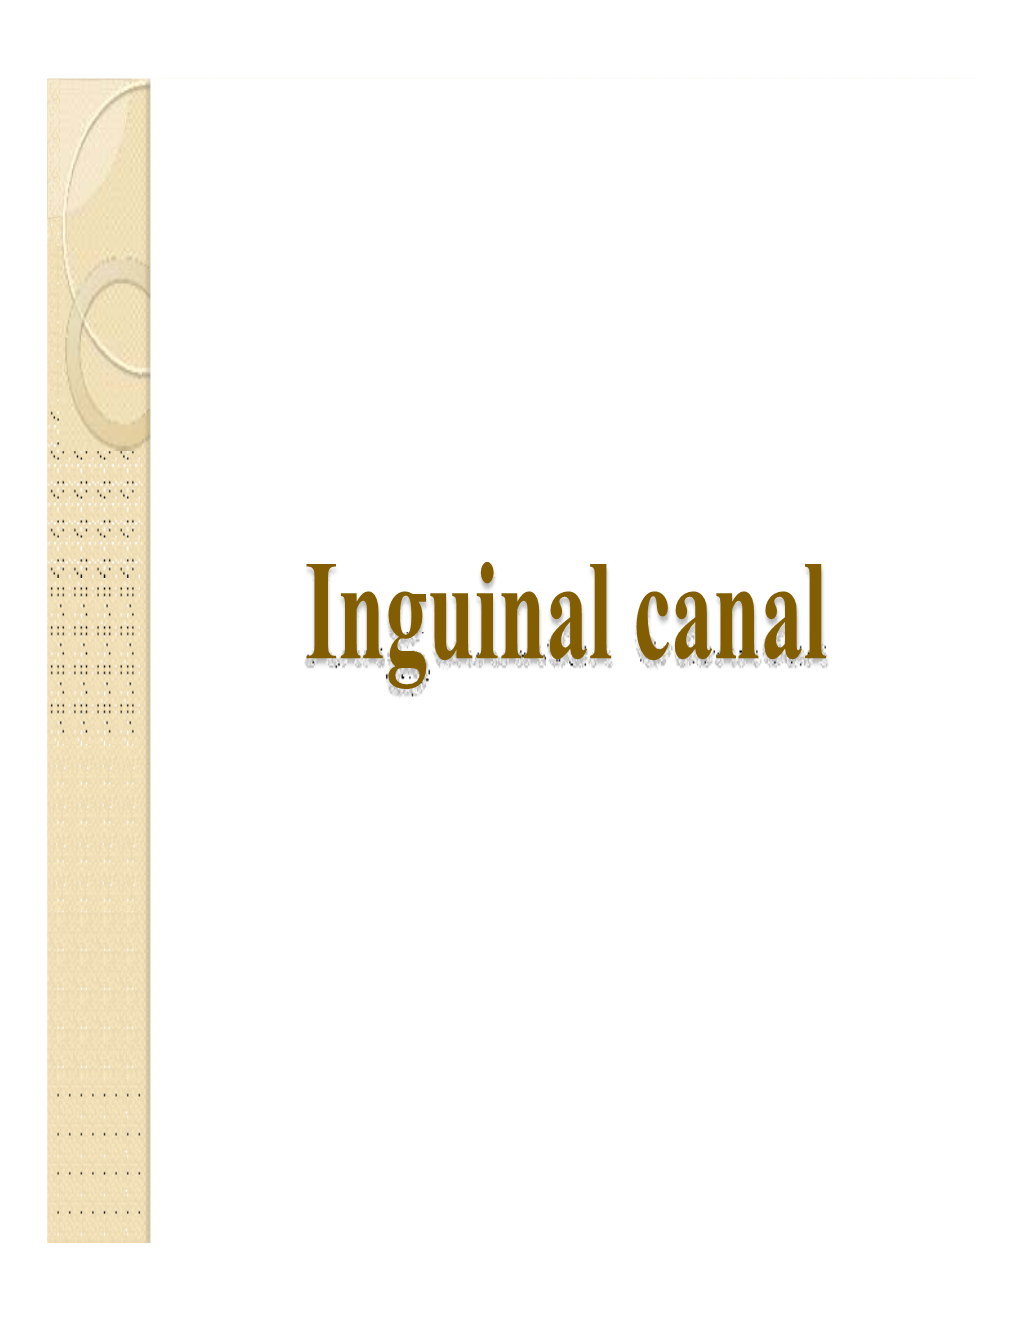 Inguinal Canal Inguinal Ligament: It’S a Folding of External Oblique Aponeurosis Which Extending Between Anterior Superior Iliac Spine & Pubic Tubercle